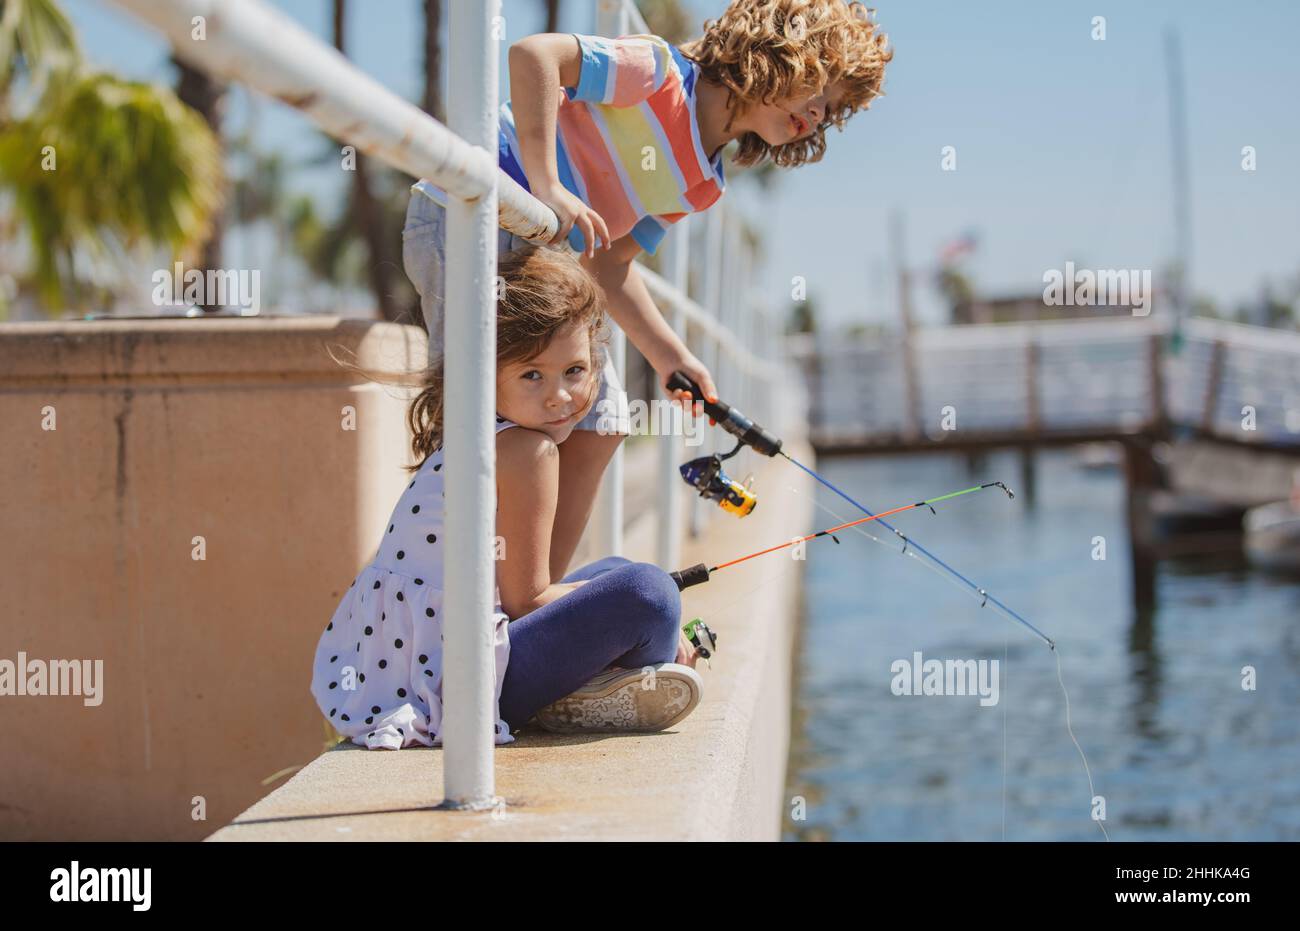 https://c8.alamy.com/comp/2HHKA4G/children-fishing-couple-of-kids-on-pier-child-at-jetty-with-rod-boy-and-girl-with-fish-rod-2HHKA4G.jpg